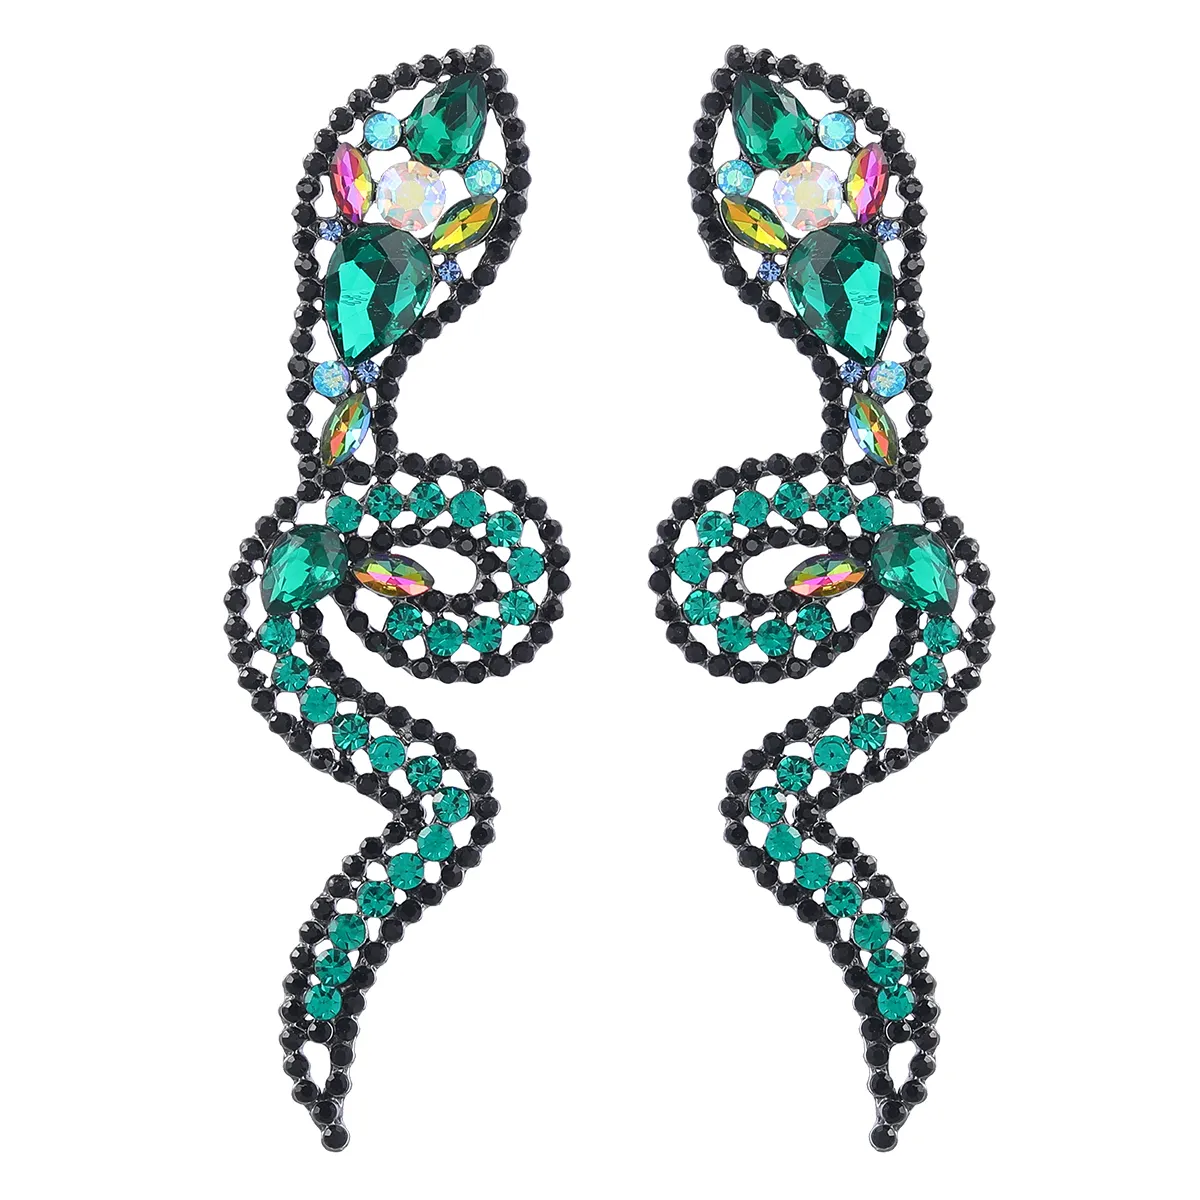 Earrings snake shaped alloy set green colorful geometric stud fashion for European and American Internet celebrity